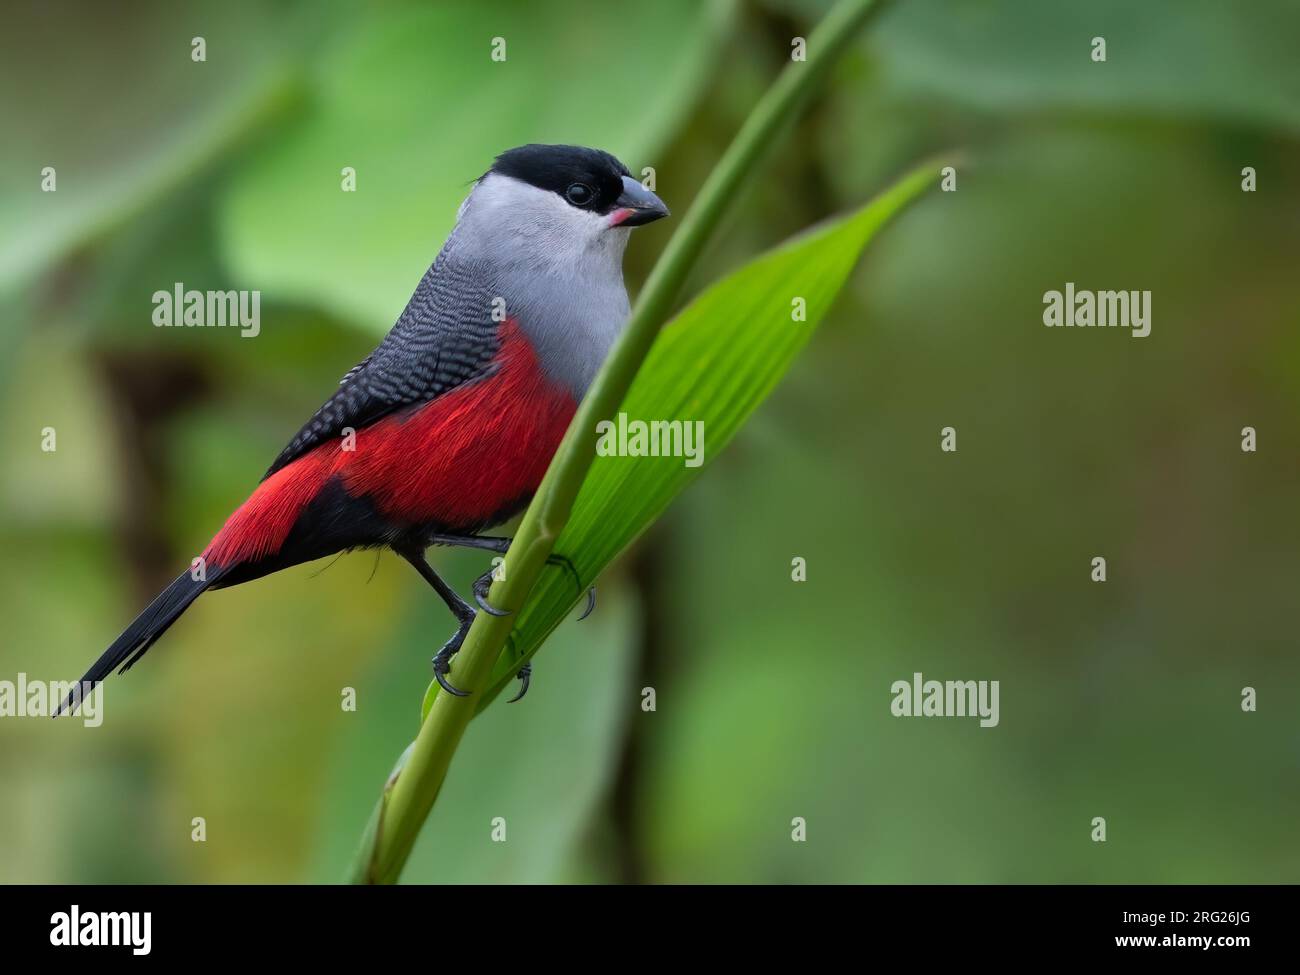 Adult Black-headed Waxbill (Estrilda atricapilla) perched on a branch in a rainforest in Equatorial Guinea. Stock Photo